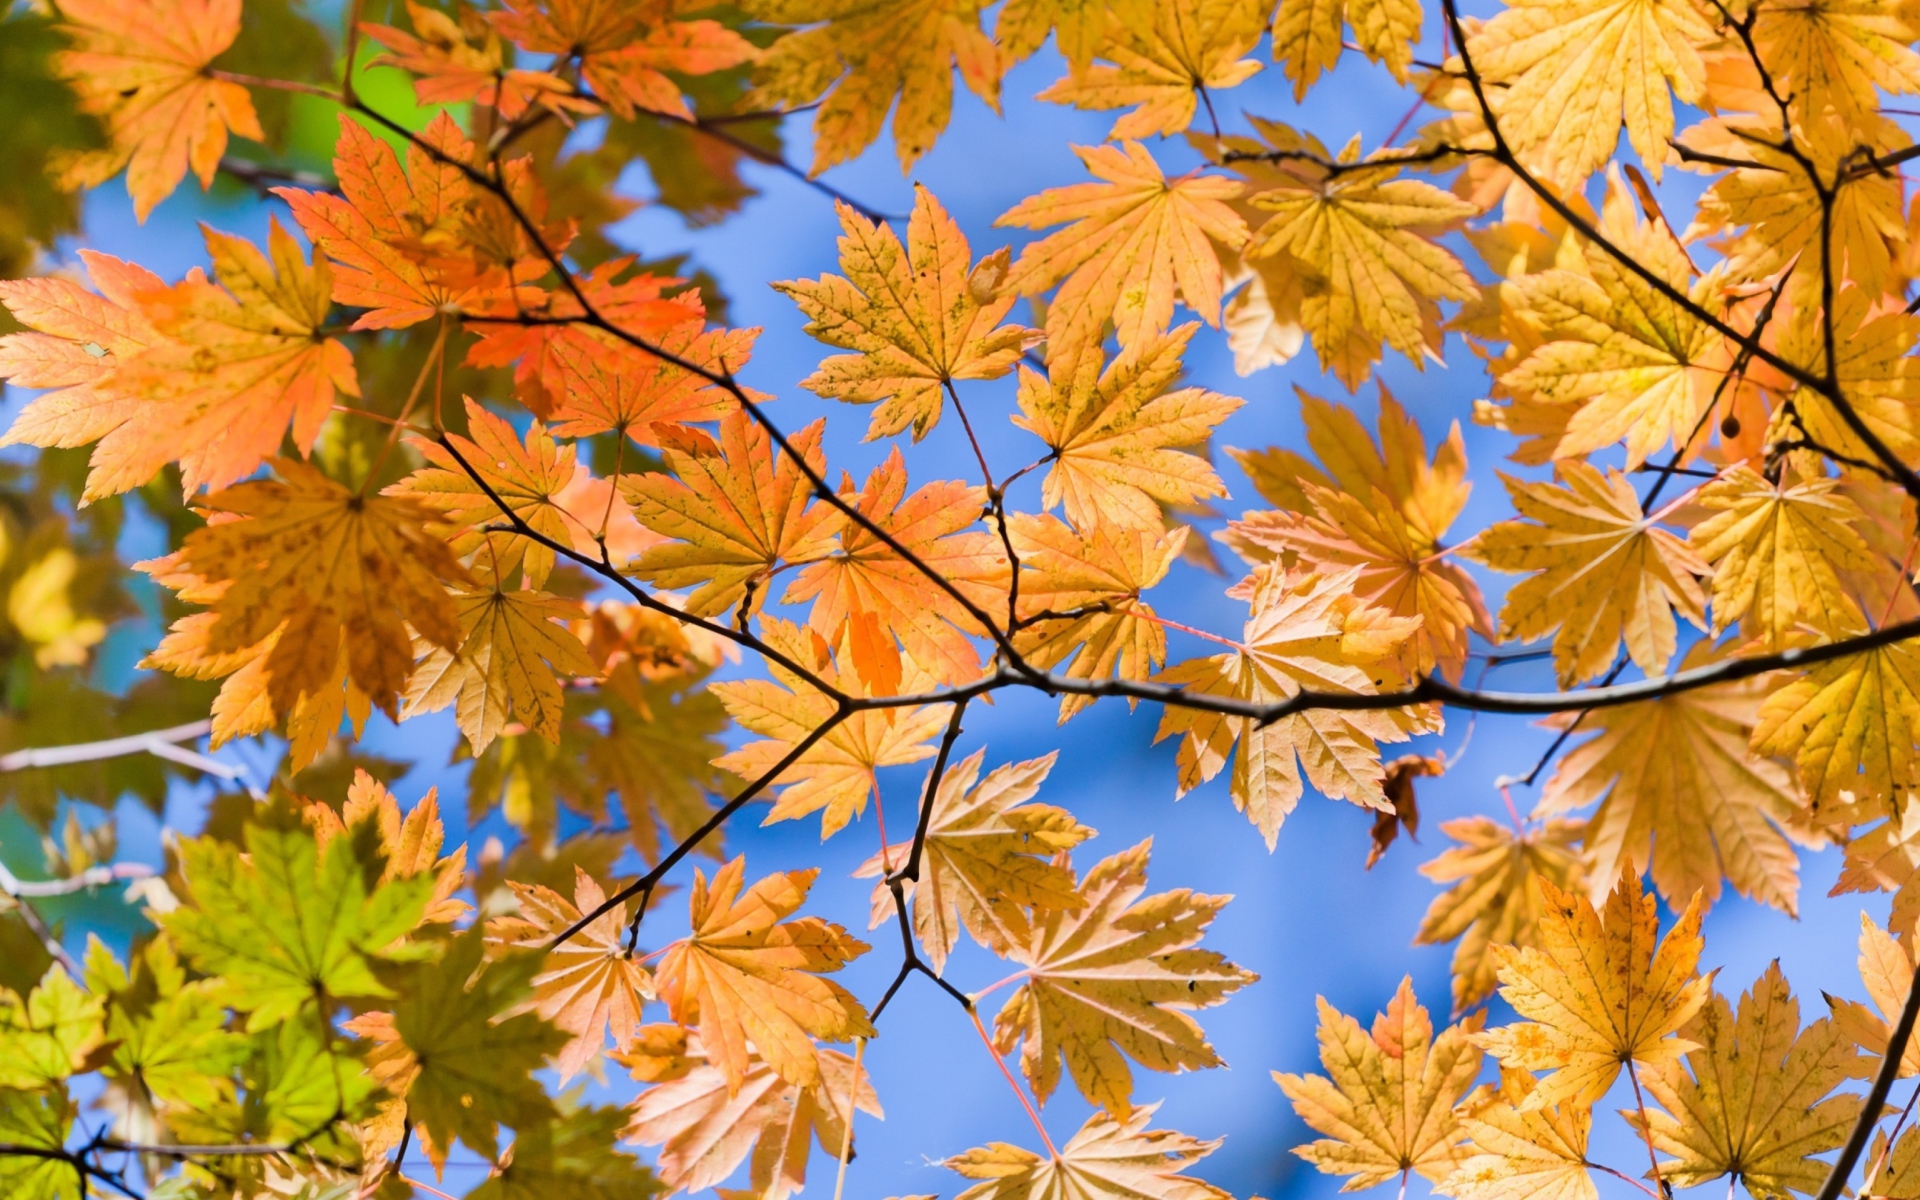 Autumn Leaves And Blue Sky wallpaper 1920x1200